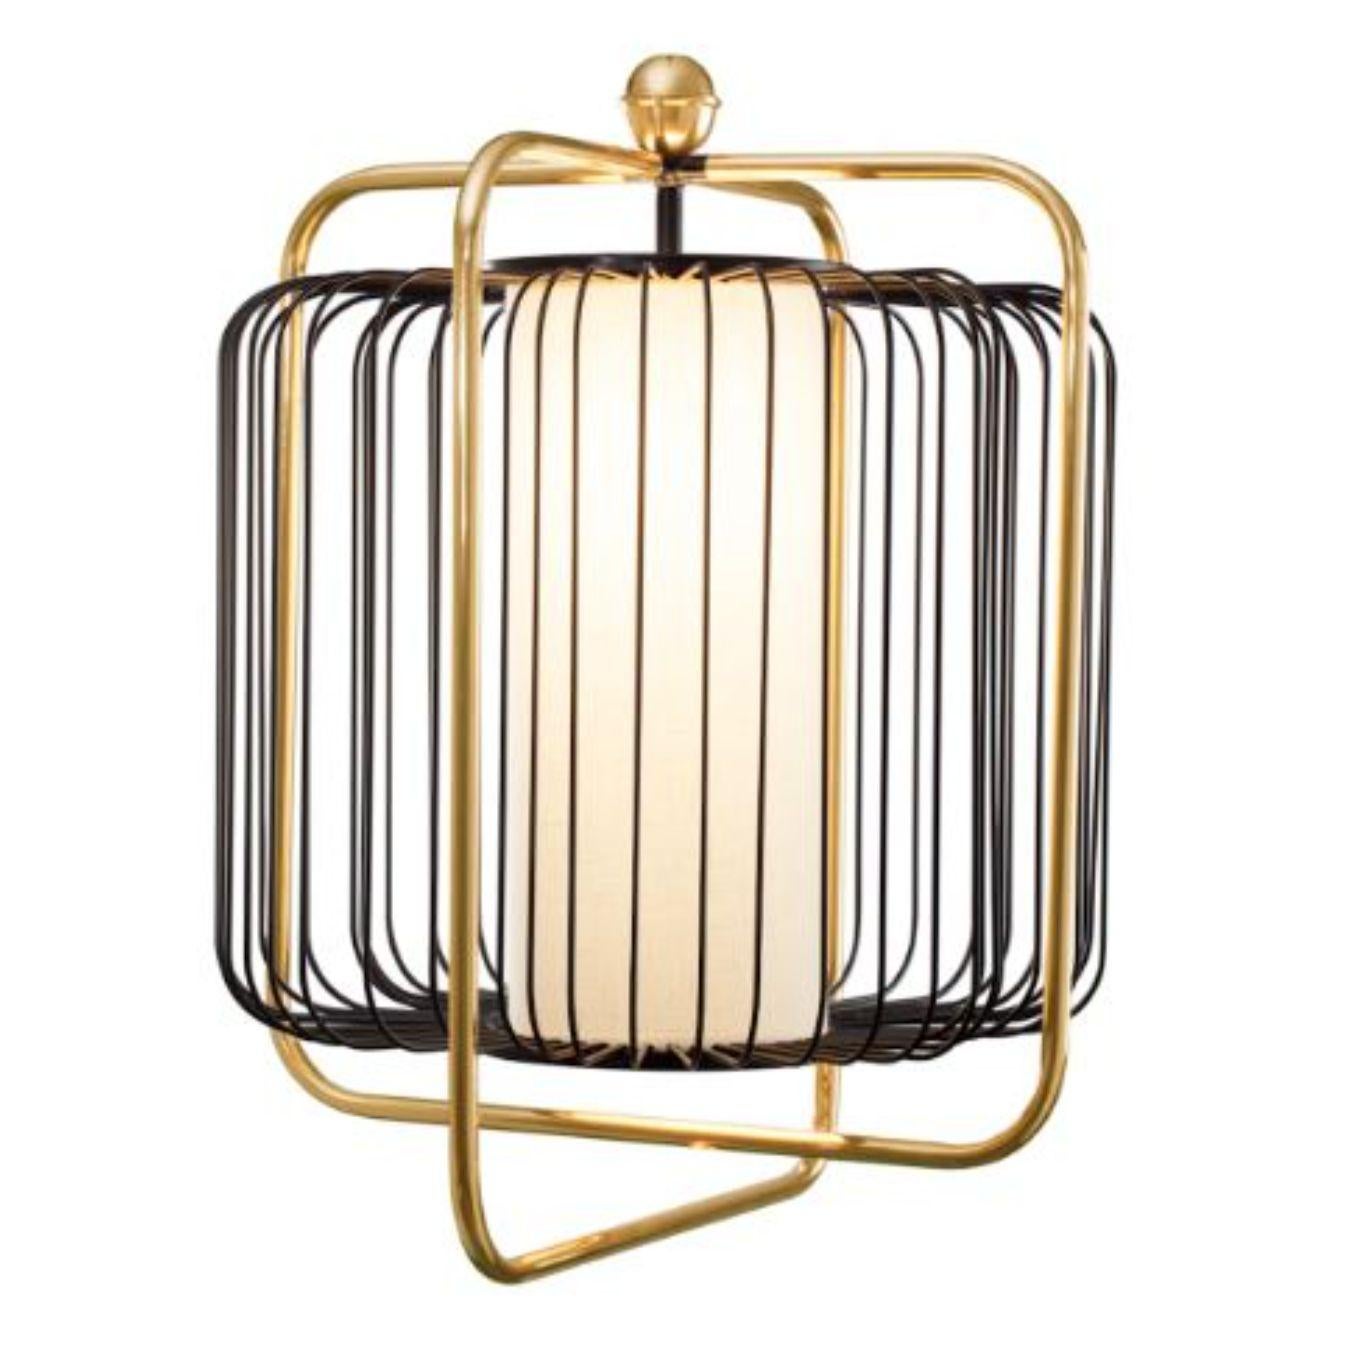 Copper and black Jules suspension lamp by Dooq
Dimensions: W 73 x D 73 x H 72 cm
Materials: lacquered metal, polished or brushed metal, copper.
abat-jour: cotton
Also available in different colors and materials.